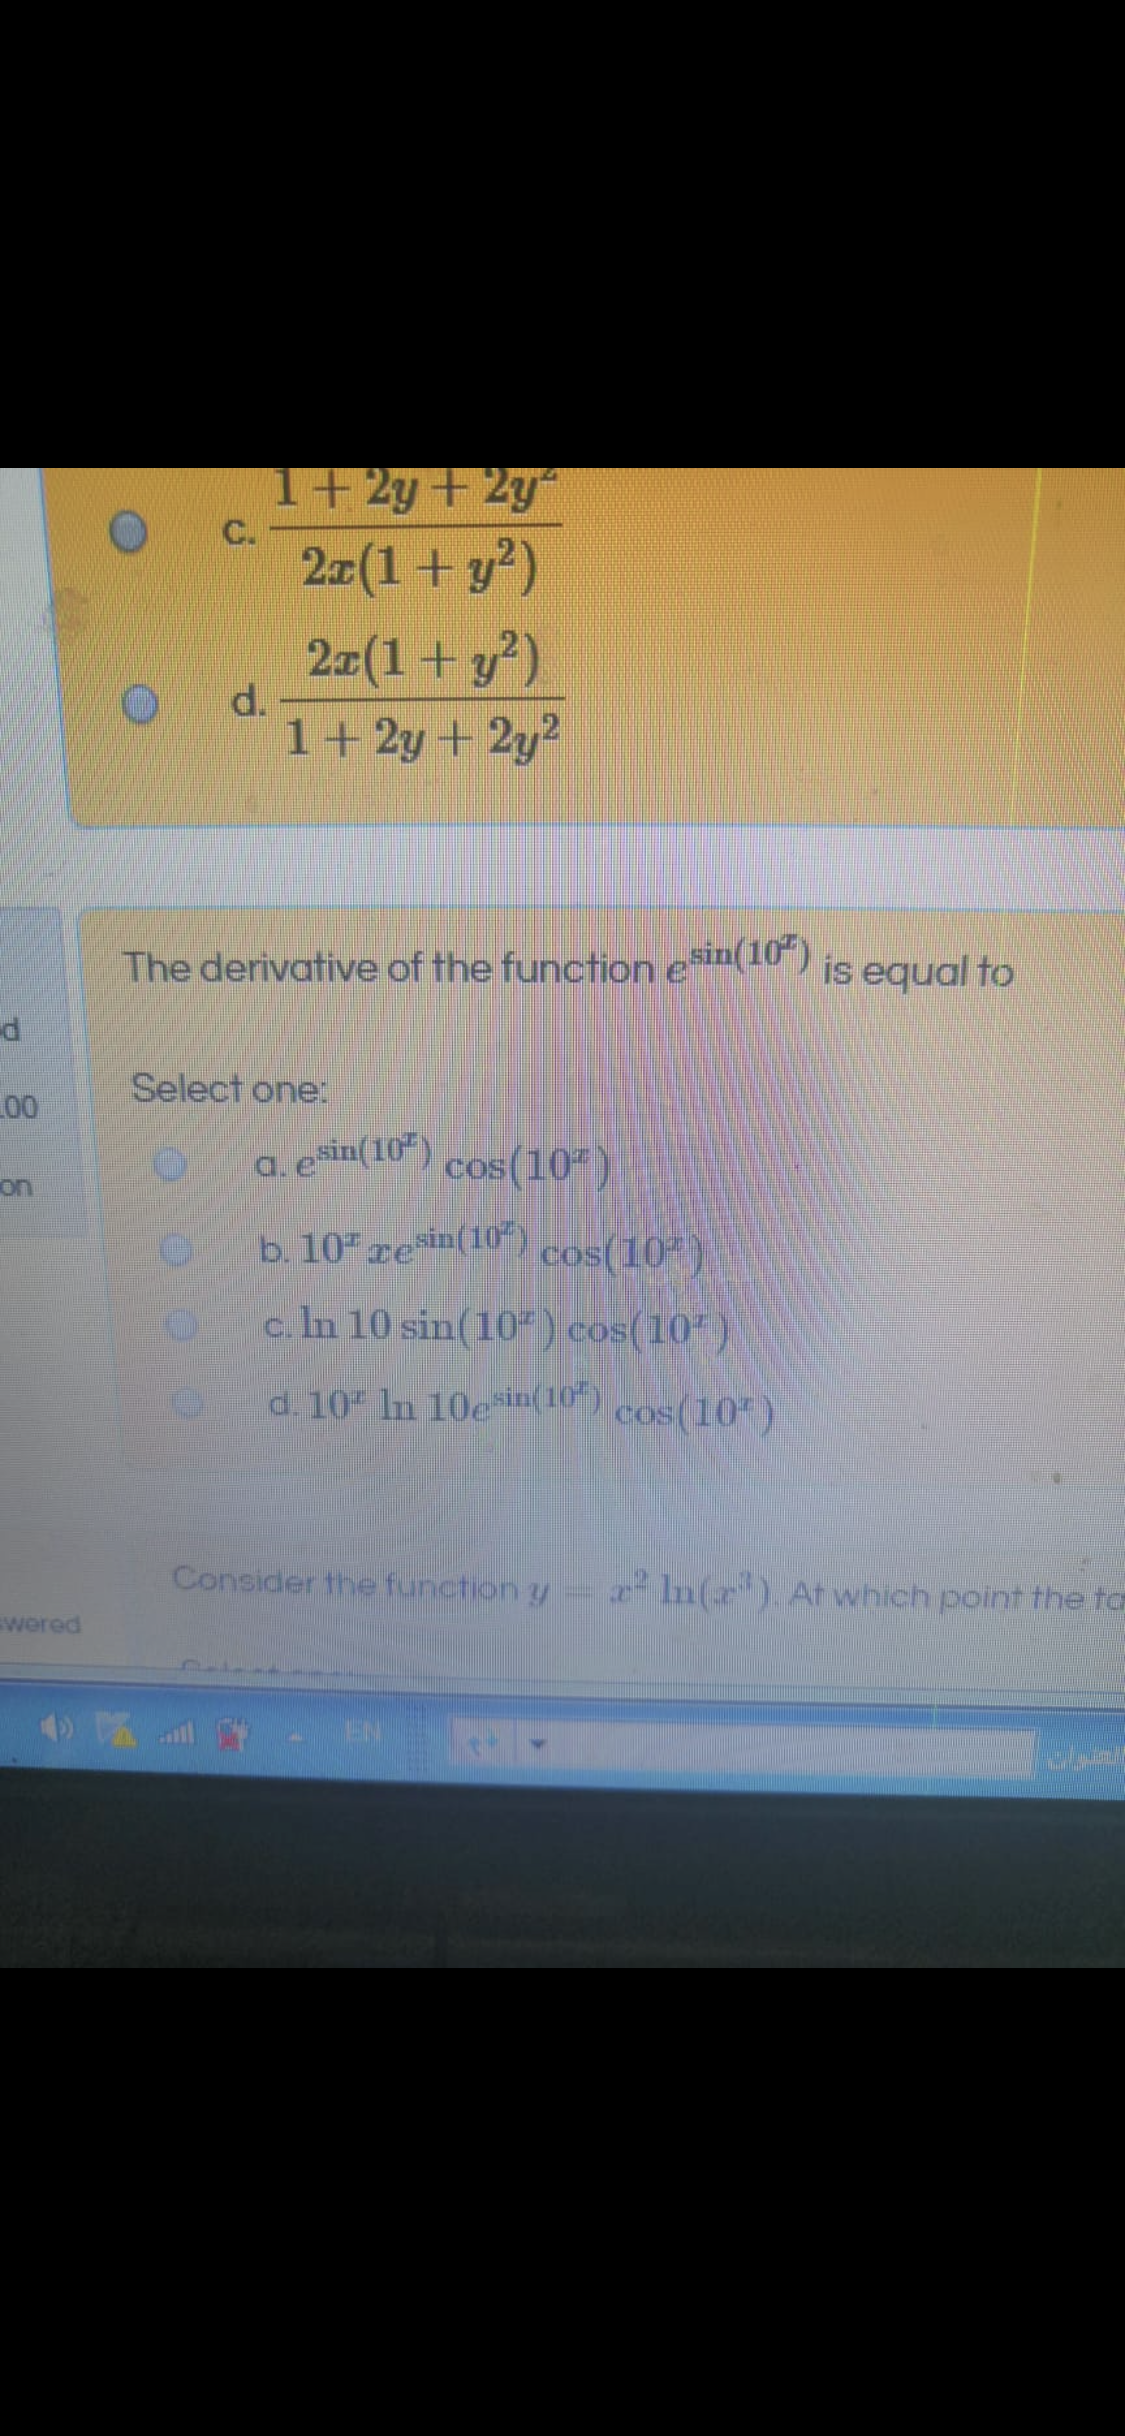 The derivative of the function ein(10)
is equal to
